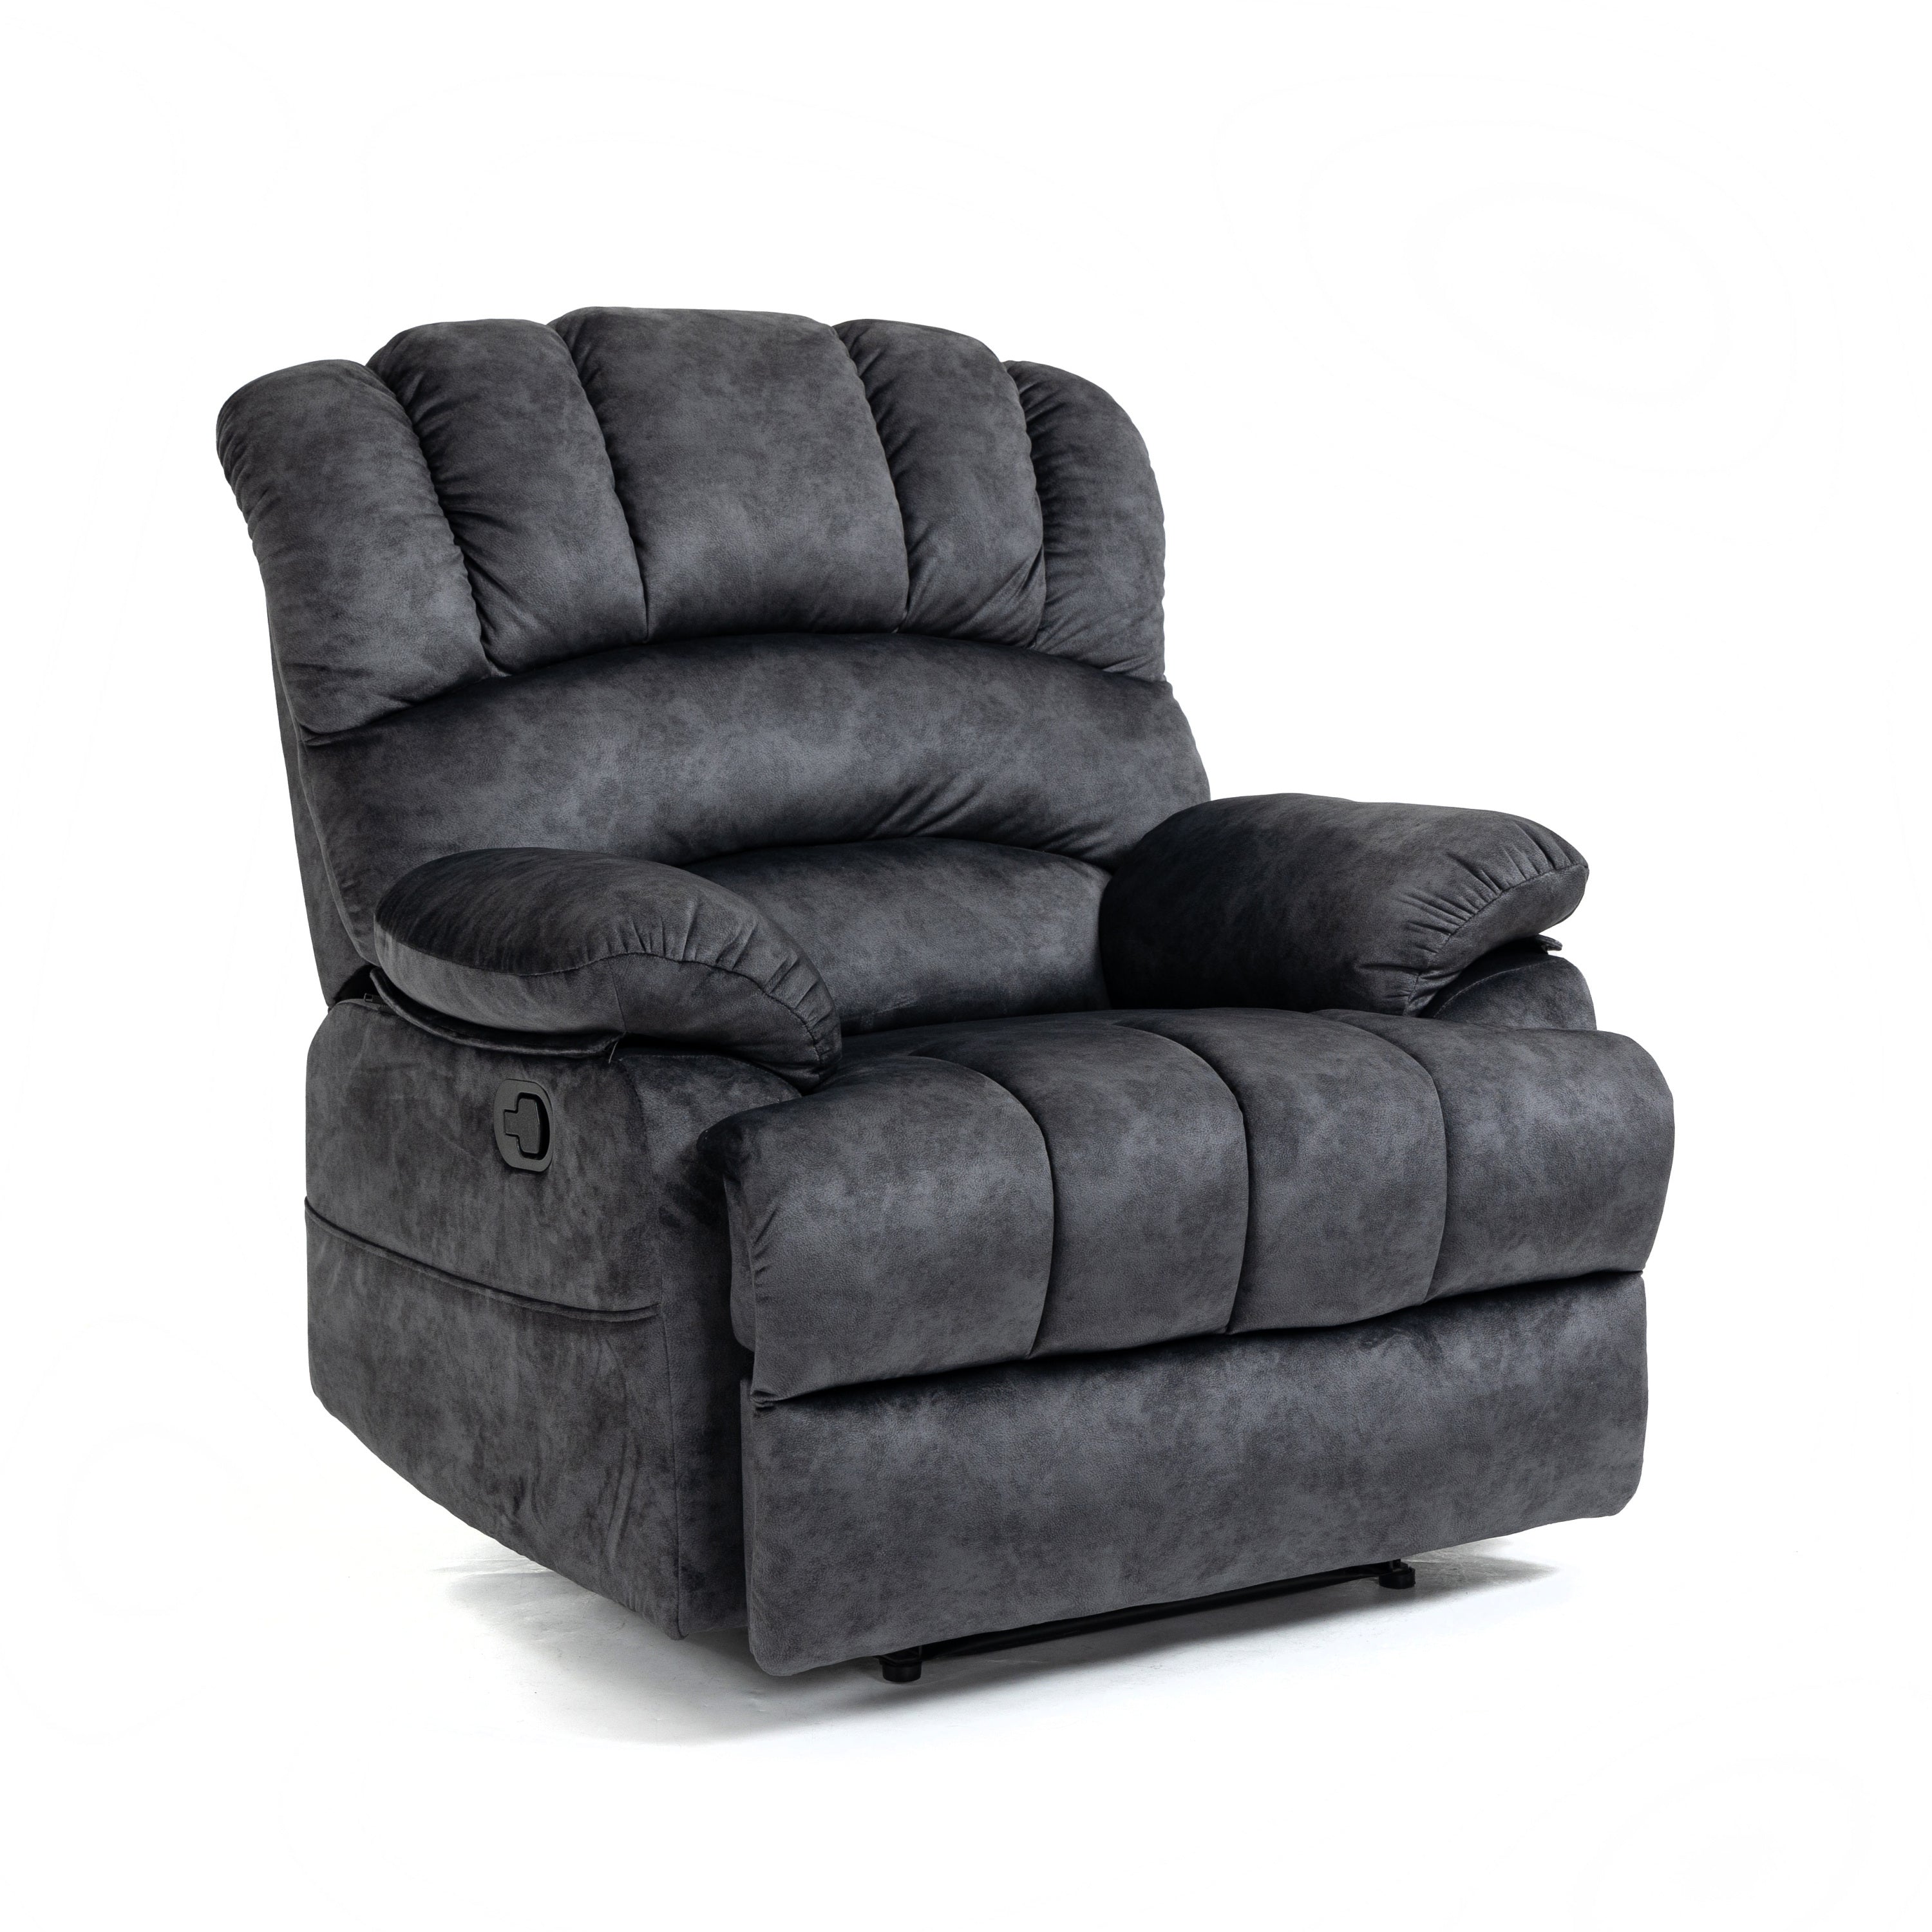 Colton Oversized Manual Recliner Chair